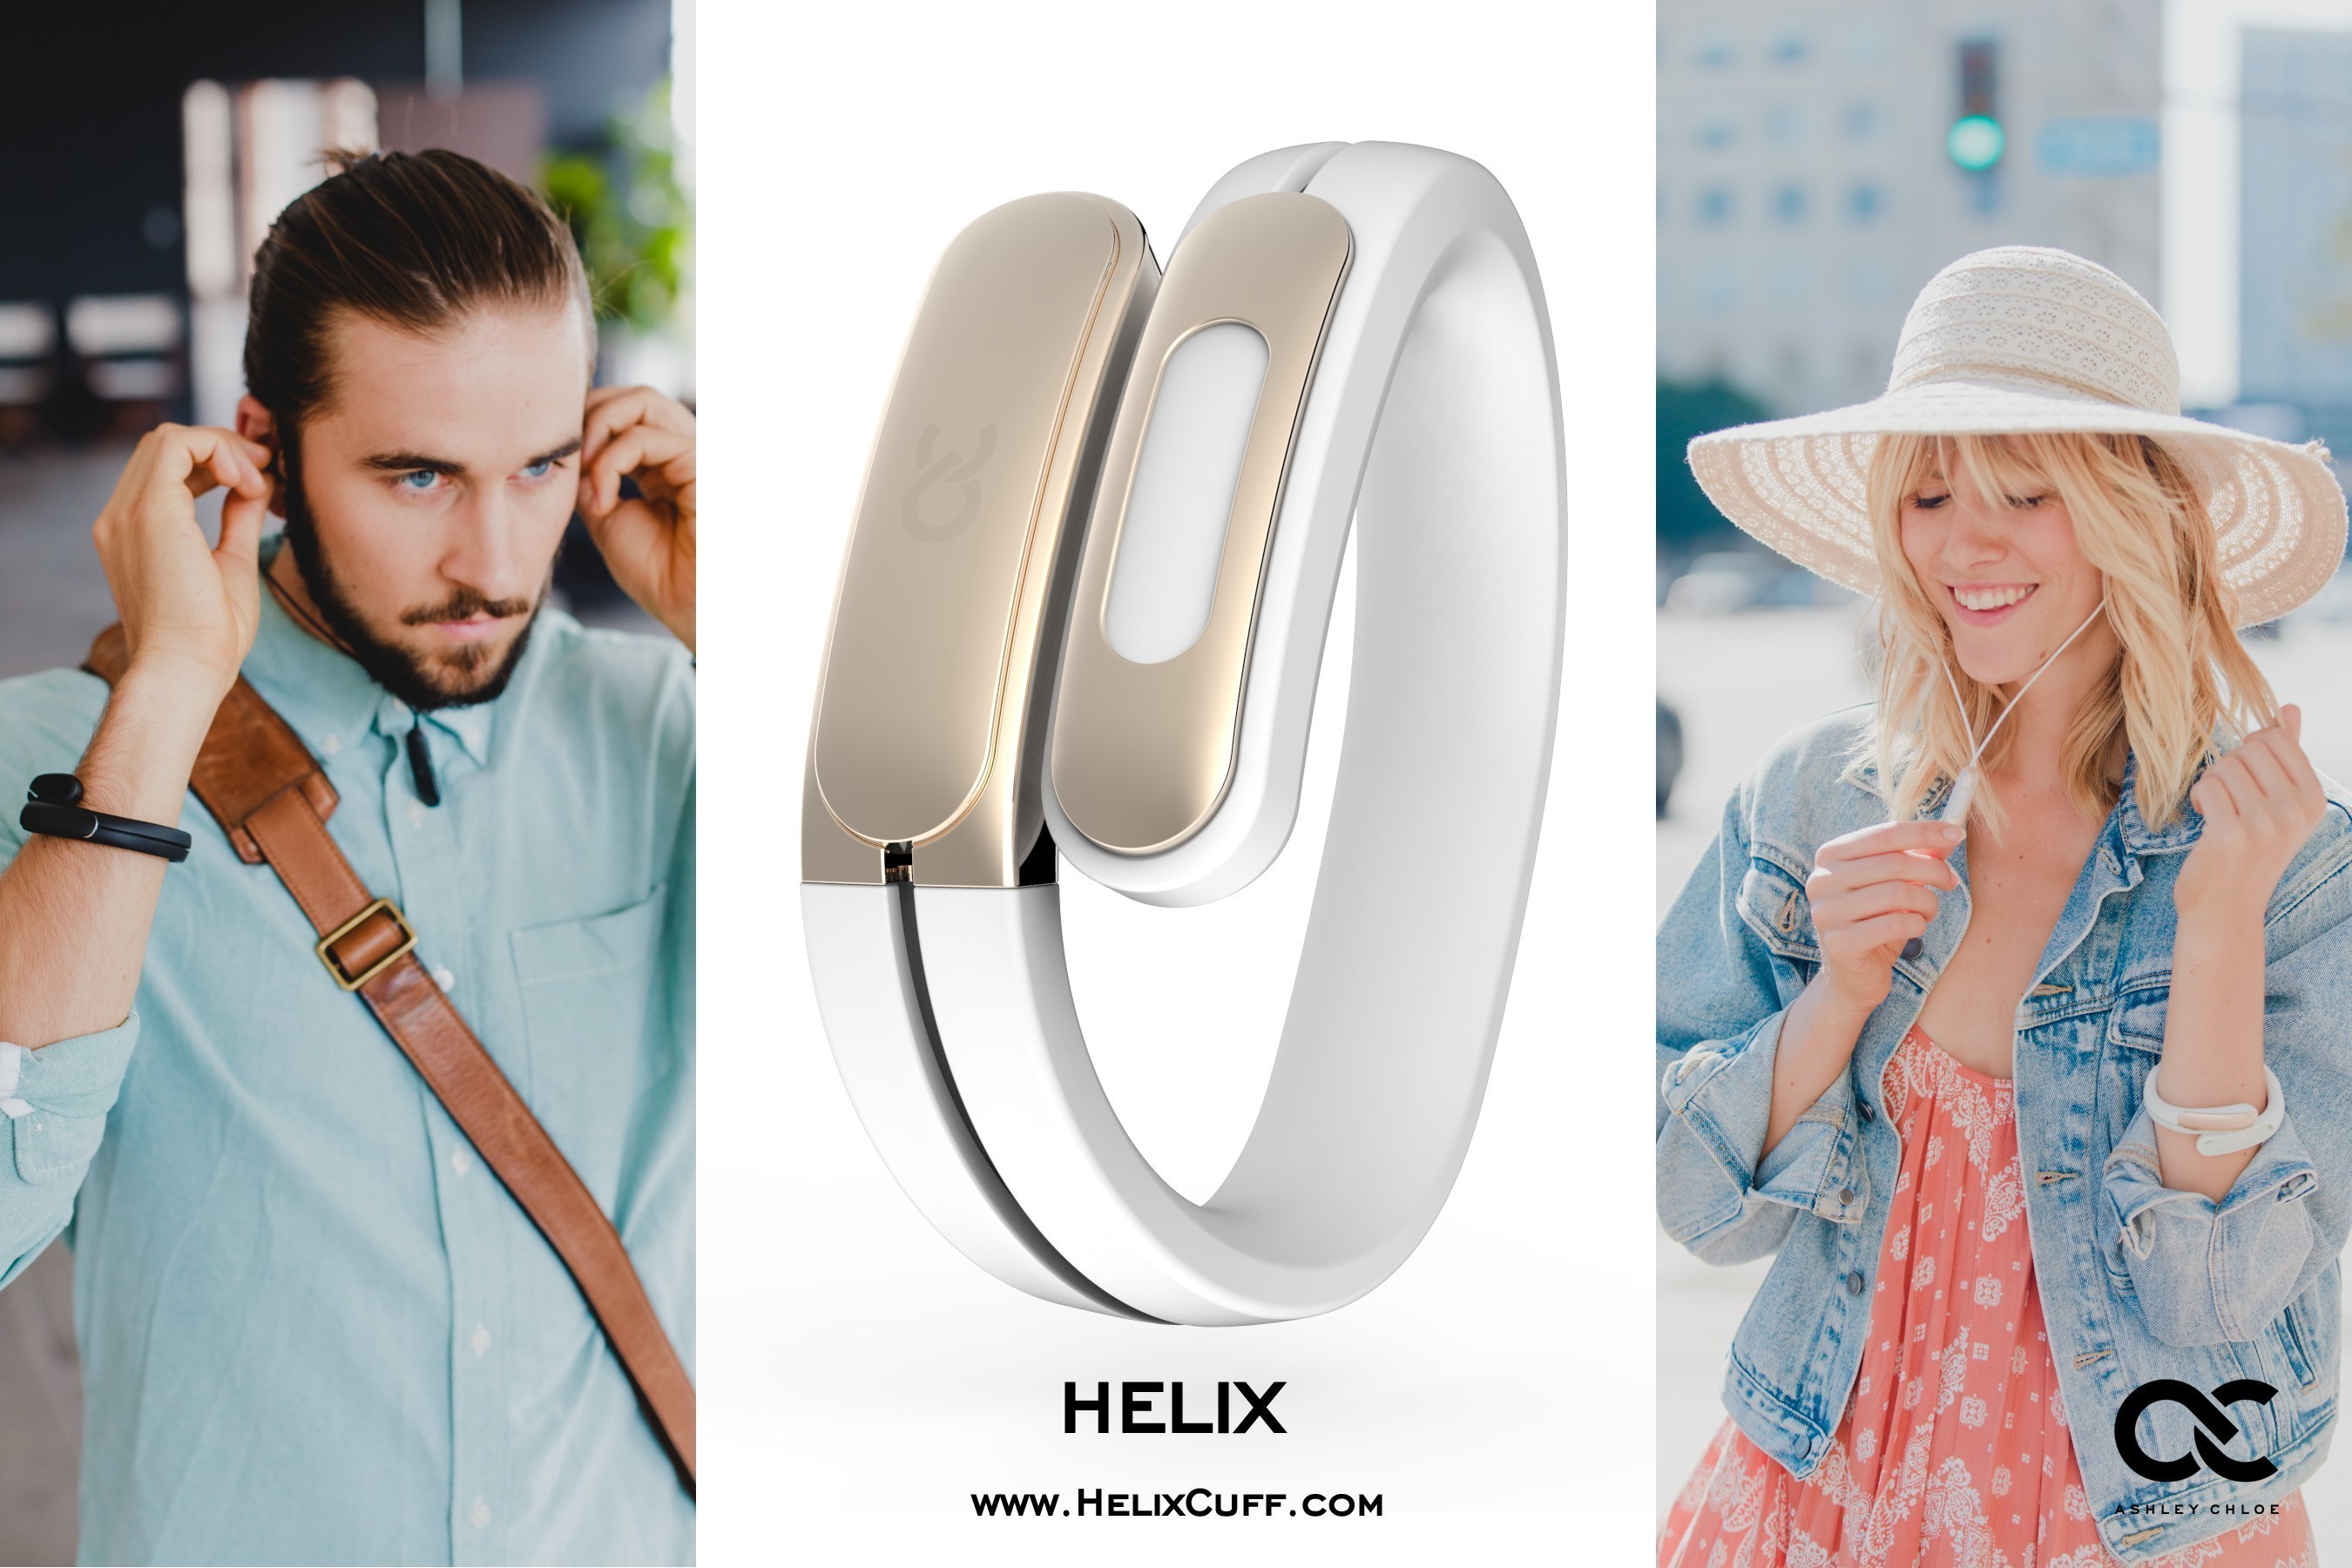 Ashley Chloe has launched a Kickstarter campaign for the Helix Cuff, a digital wearable accessory that unites fashion with function. Helix harnesses Bluetooth wireless technology to pair tiny in-ear headphones cleverly hidden in a stylish cuff with your favorite iOS and Android mobile, wearable and smart devices. Helix is offered in white, black and bright red with embellishments in 18K gold, champagne gold or silver aluminum. Helix offers stereo-sound quality, a built-in microphone, and track/call...